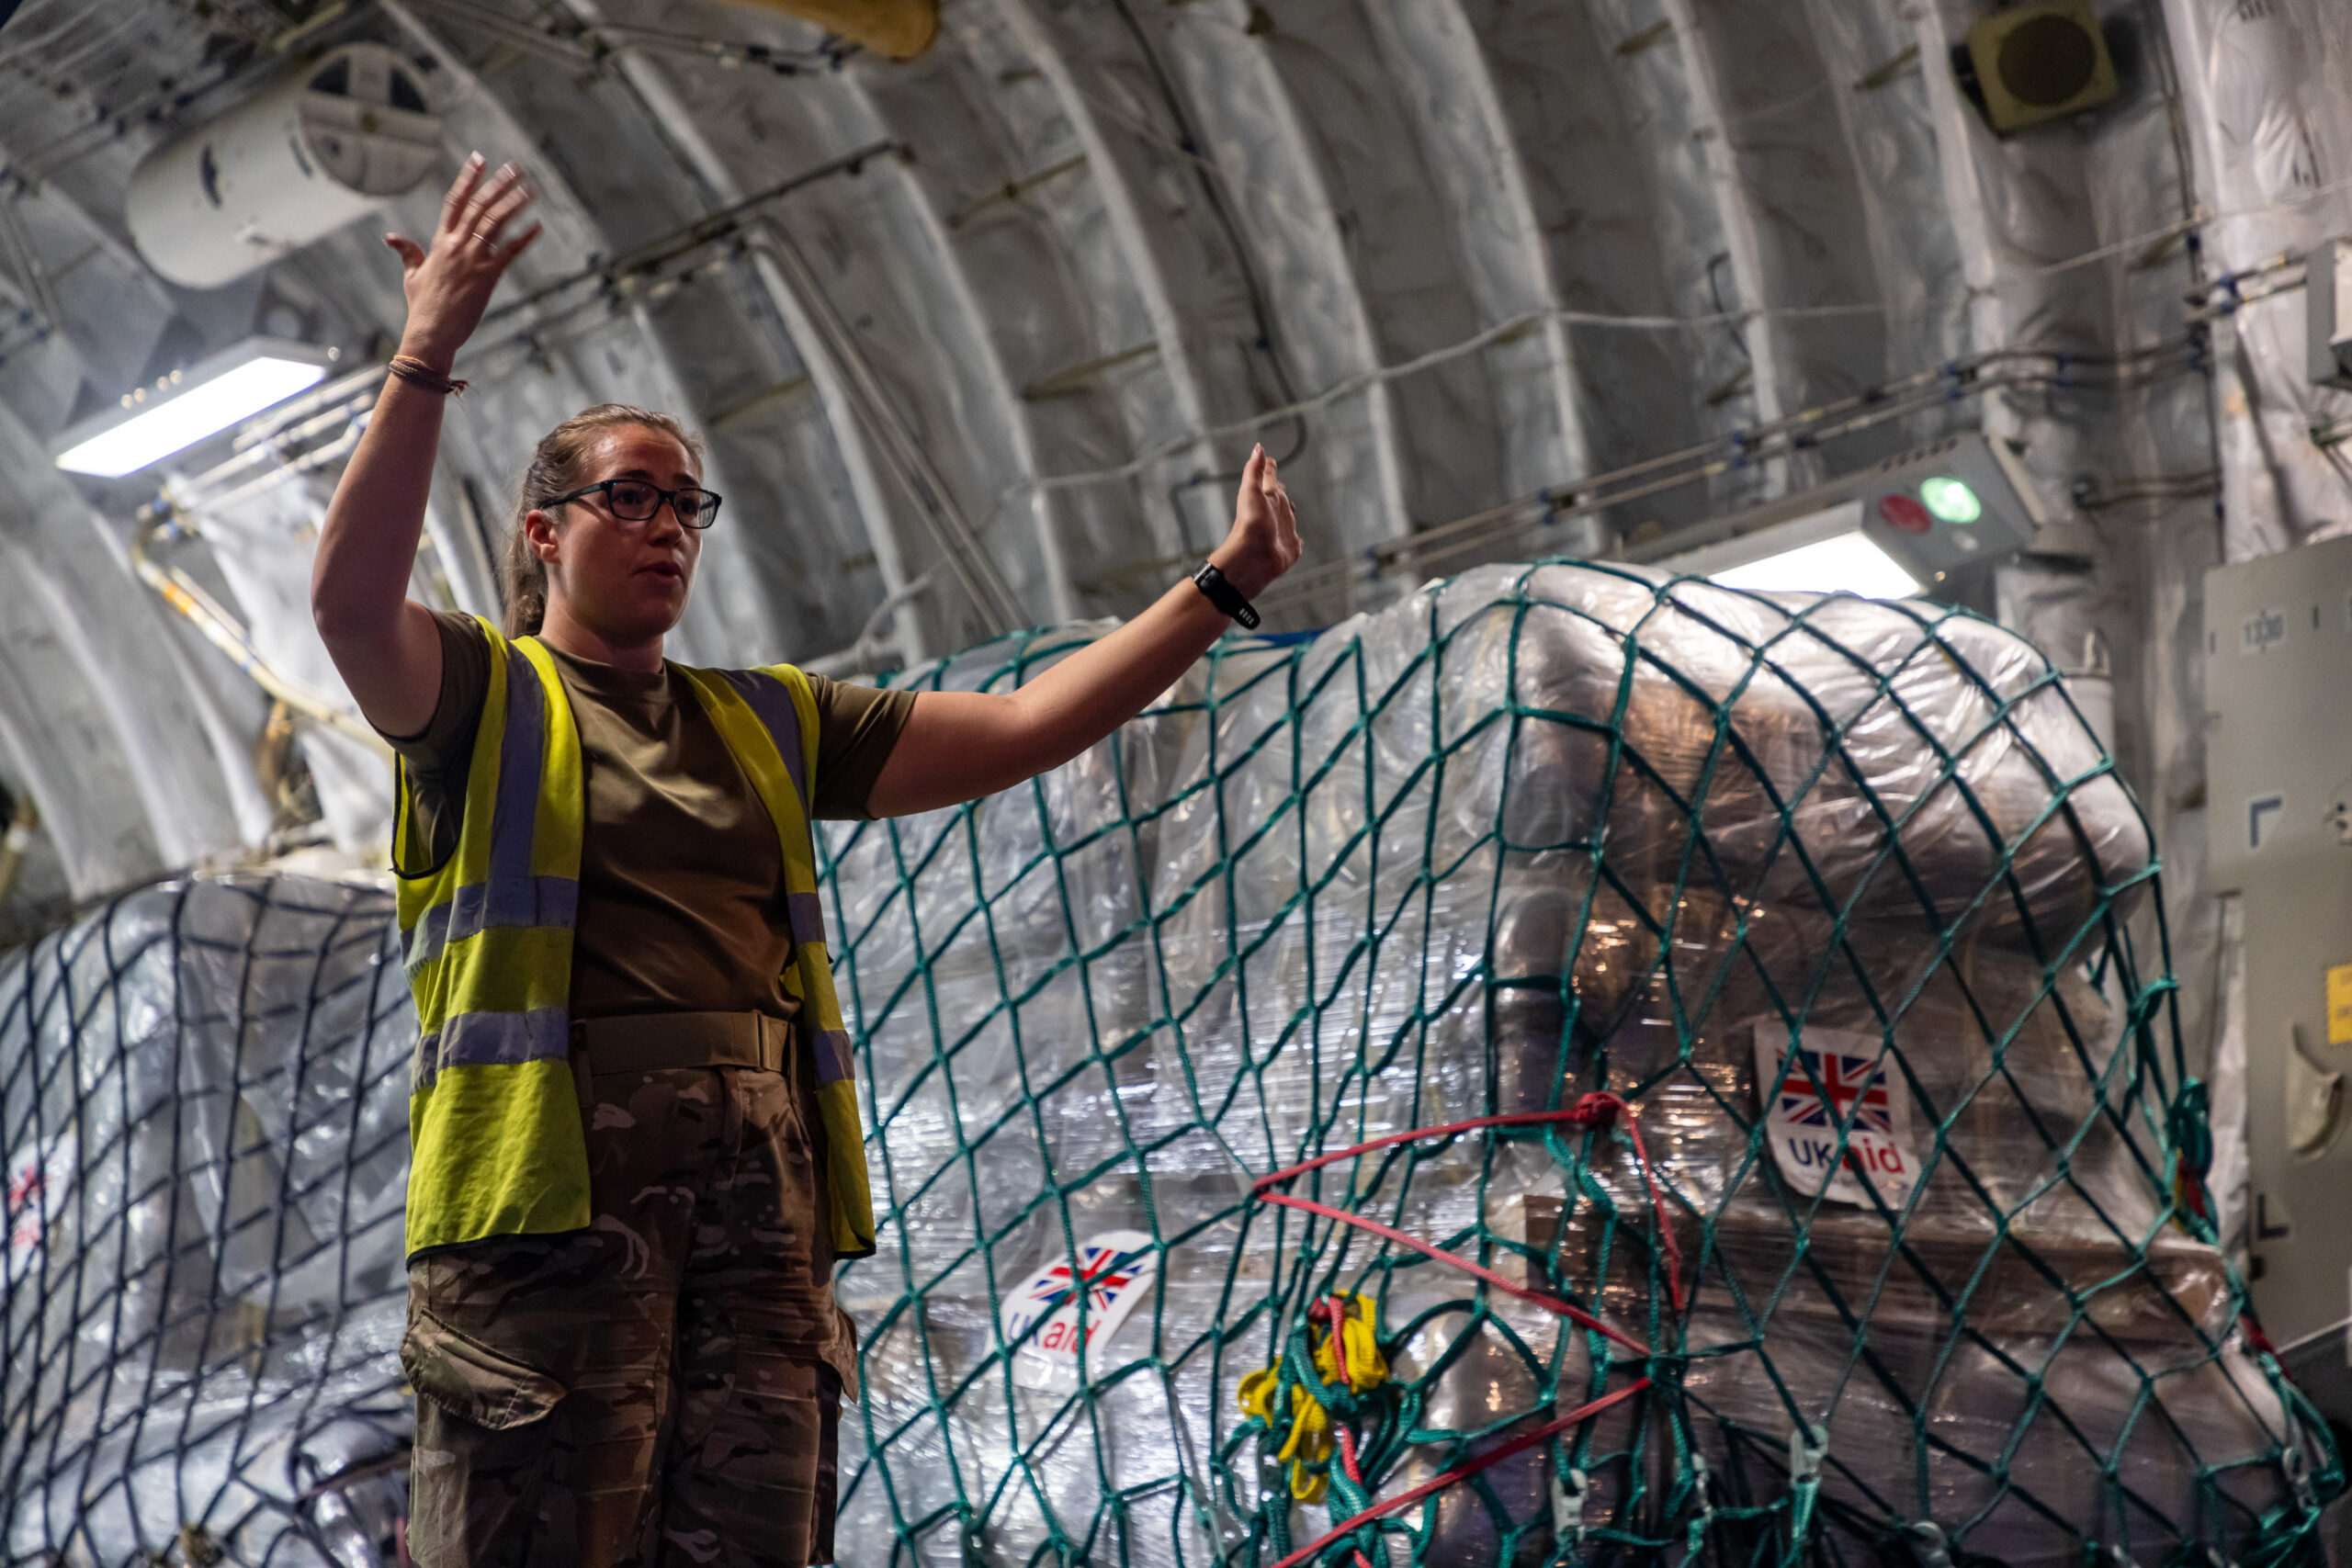 A Royal Air Force C-17 Globemaster arrived in Egypt on the 23rd of November 2023 to deliver UK Aid. The fourth UK aircraft carrying humanitarian aid landed in Al Arish, Egypt, for onward transfer to Gaza. The RAF flight carried 23 tonnes of humanitarian aid, including 4,500 blankets and 4,500 sleeping mats for distribution by the United Nations Relief and Works Agency (UNRWA). Defence Secretary Grant Shapps said: The RAF continues to deliver on the UKs commitment to helping those in need by operating flights into the region to provide urgent humanitarian support which will save civilian lives. The UK is driving international efforts to support the humanitarian response in Gaza, working closely alongside partners and allies to de-escalate the situation.